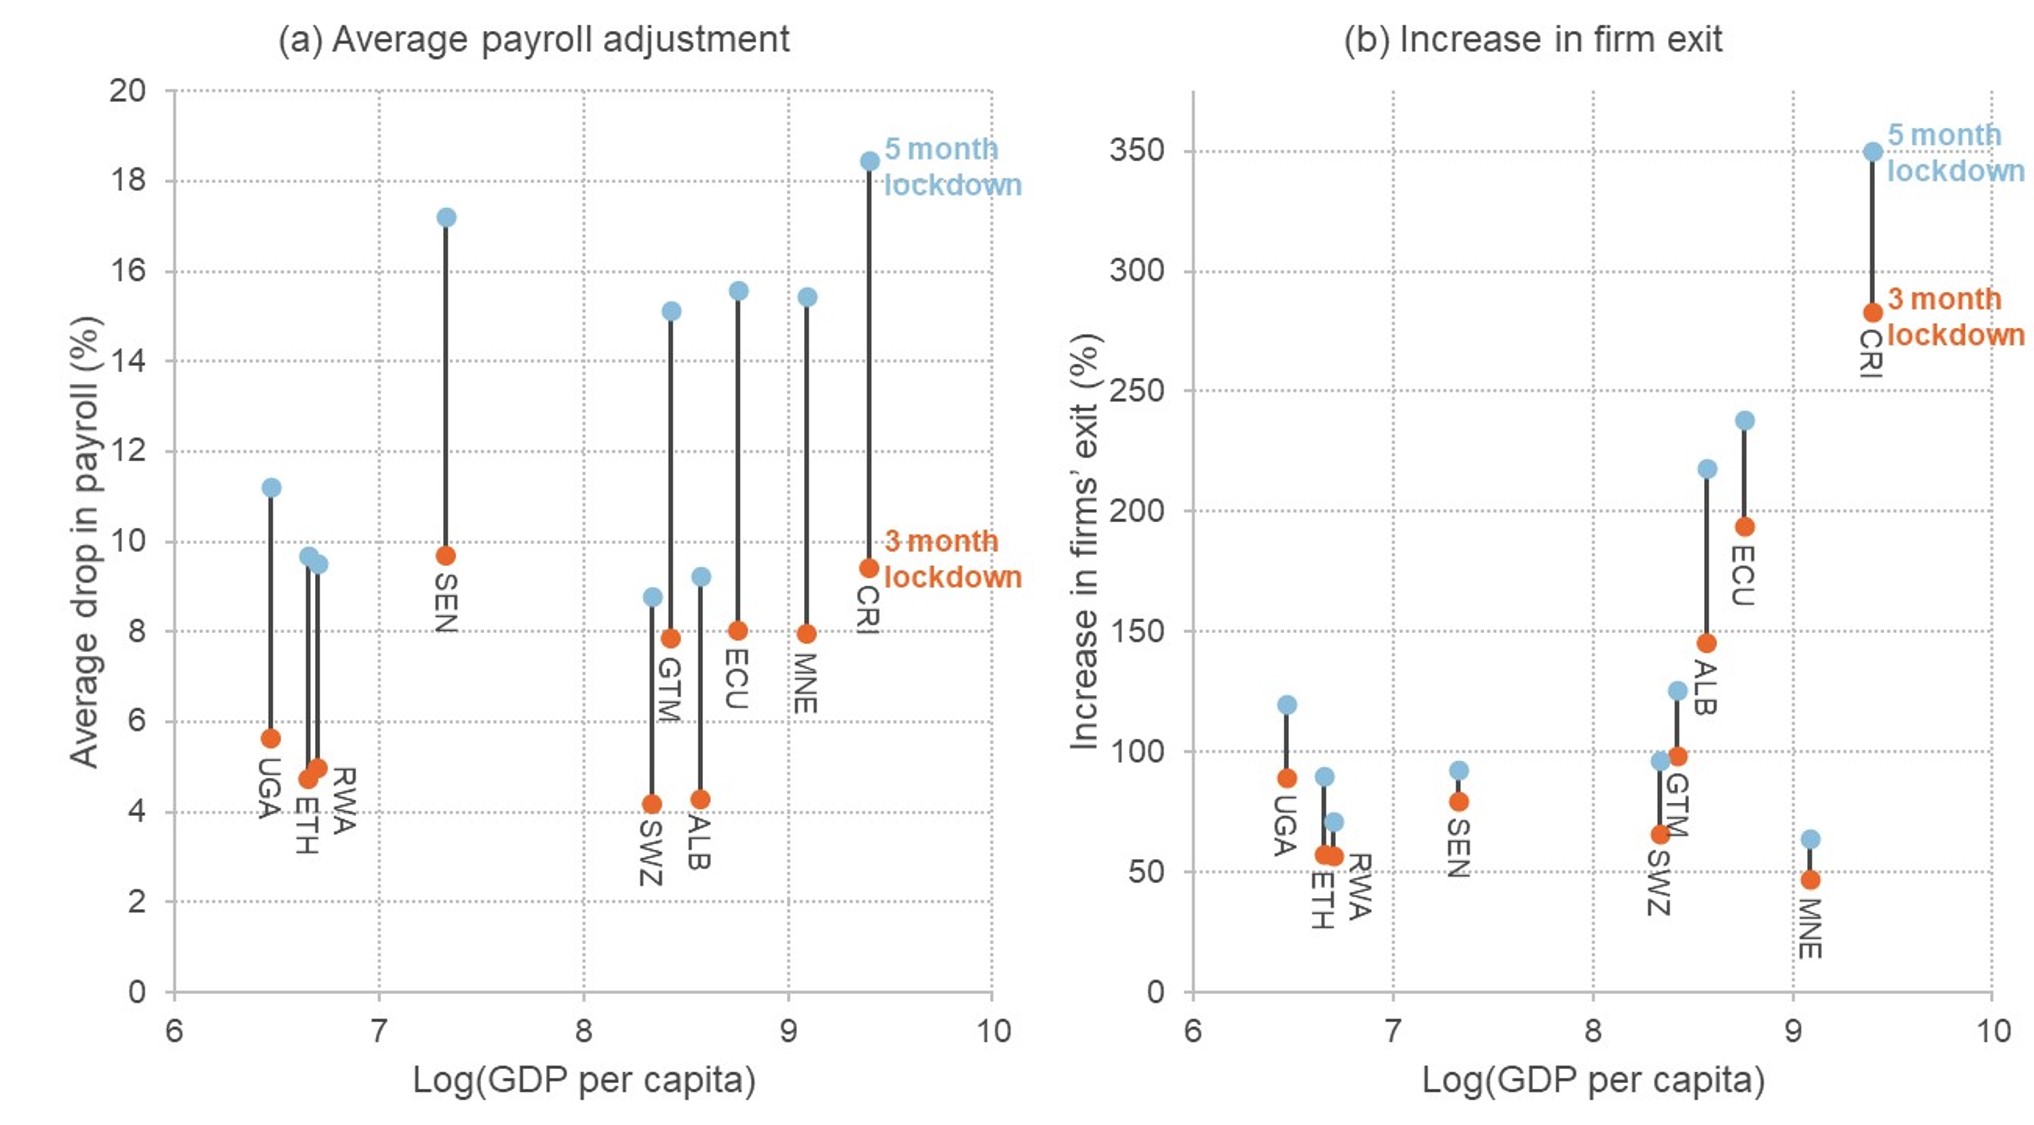 Graphs showing impact on firms' payroll and exit rates across various countries